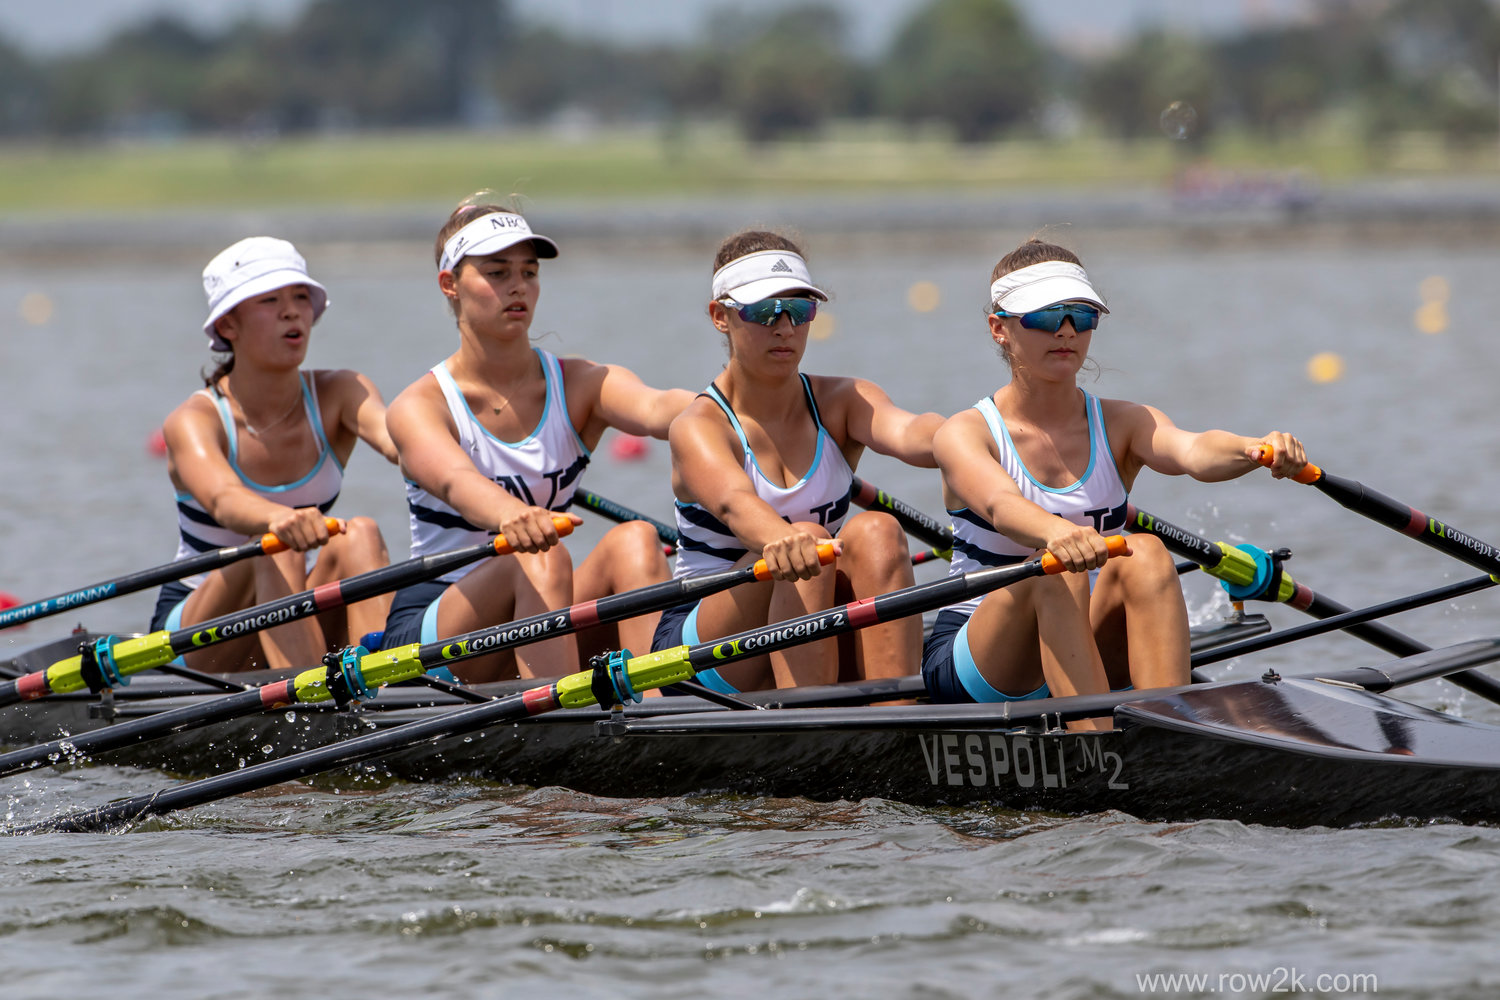 Sophia Haisman, Maude Smith-Montross, Gianna Vigliotti, and Estelle Pivorunas (from left to right) move their boat through the water at US Rowing Youth Nationals.